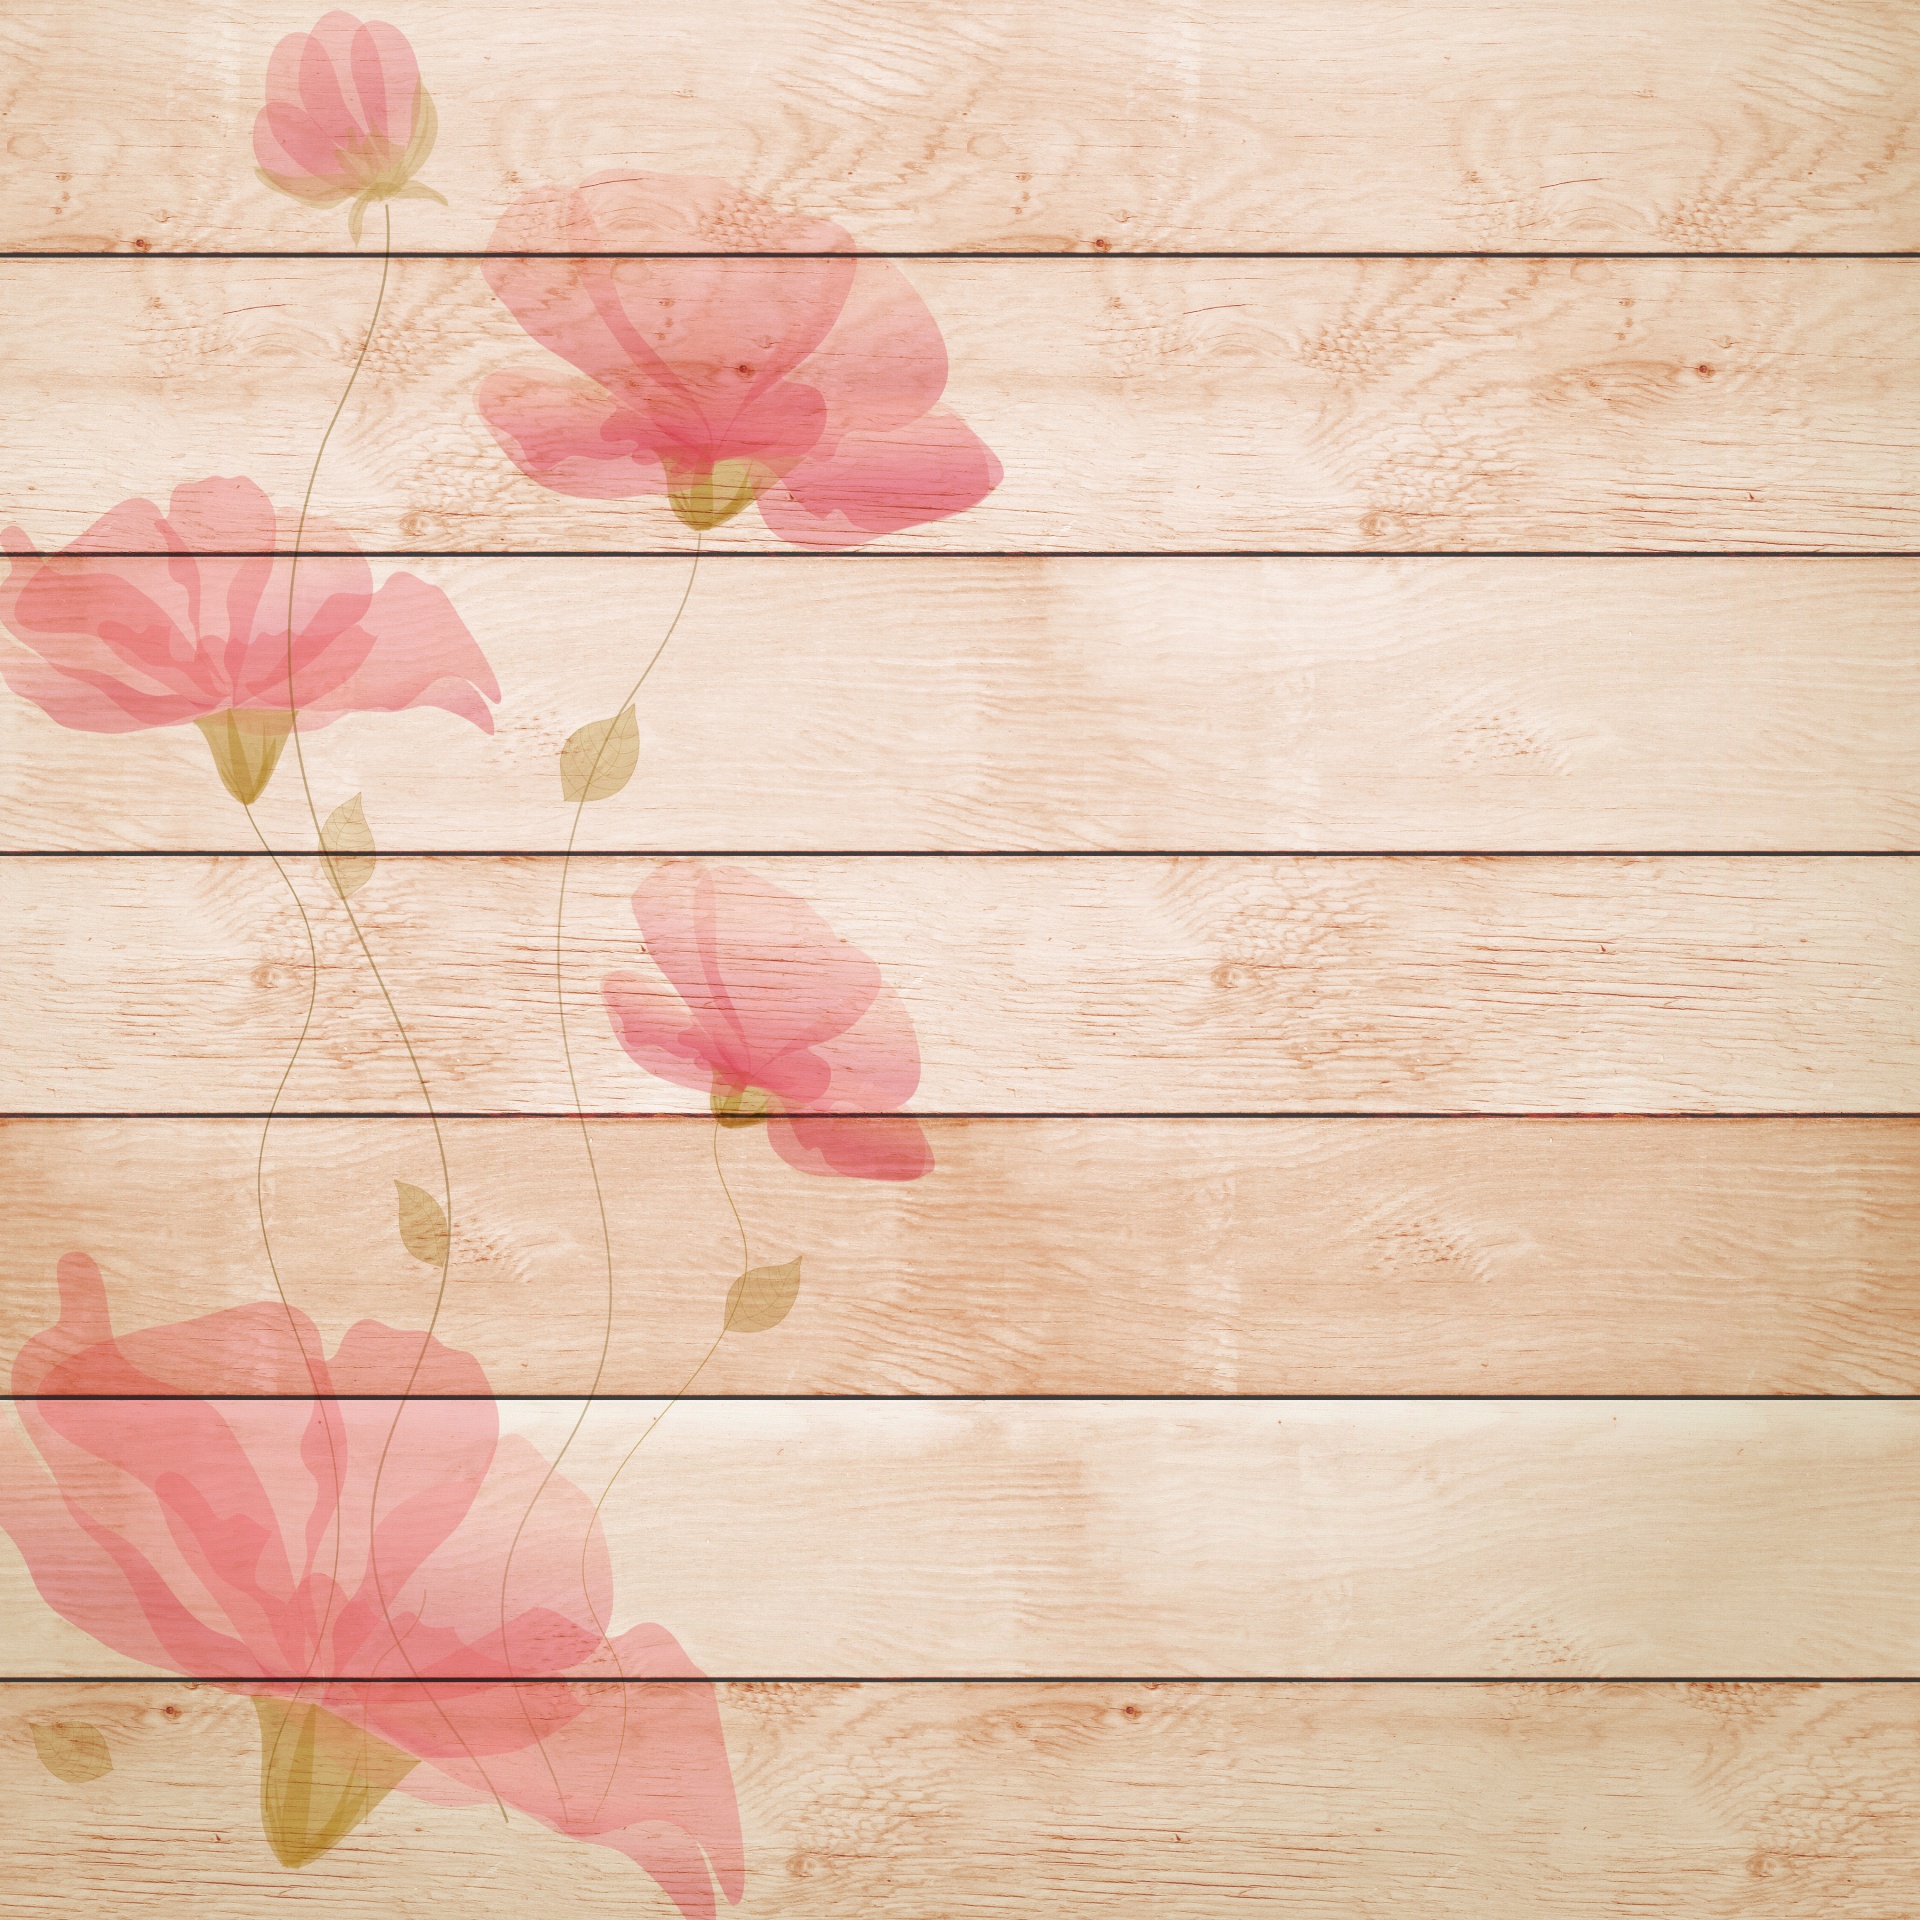 Floral Wood Digital Paper Free Stock Photo - Public Domain Pictures